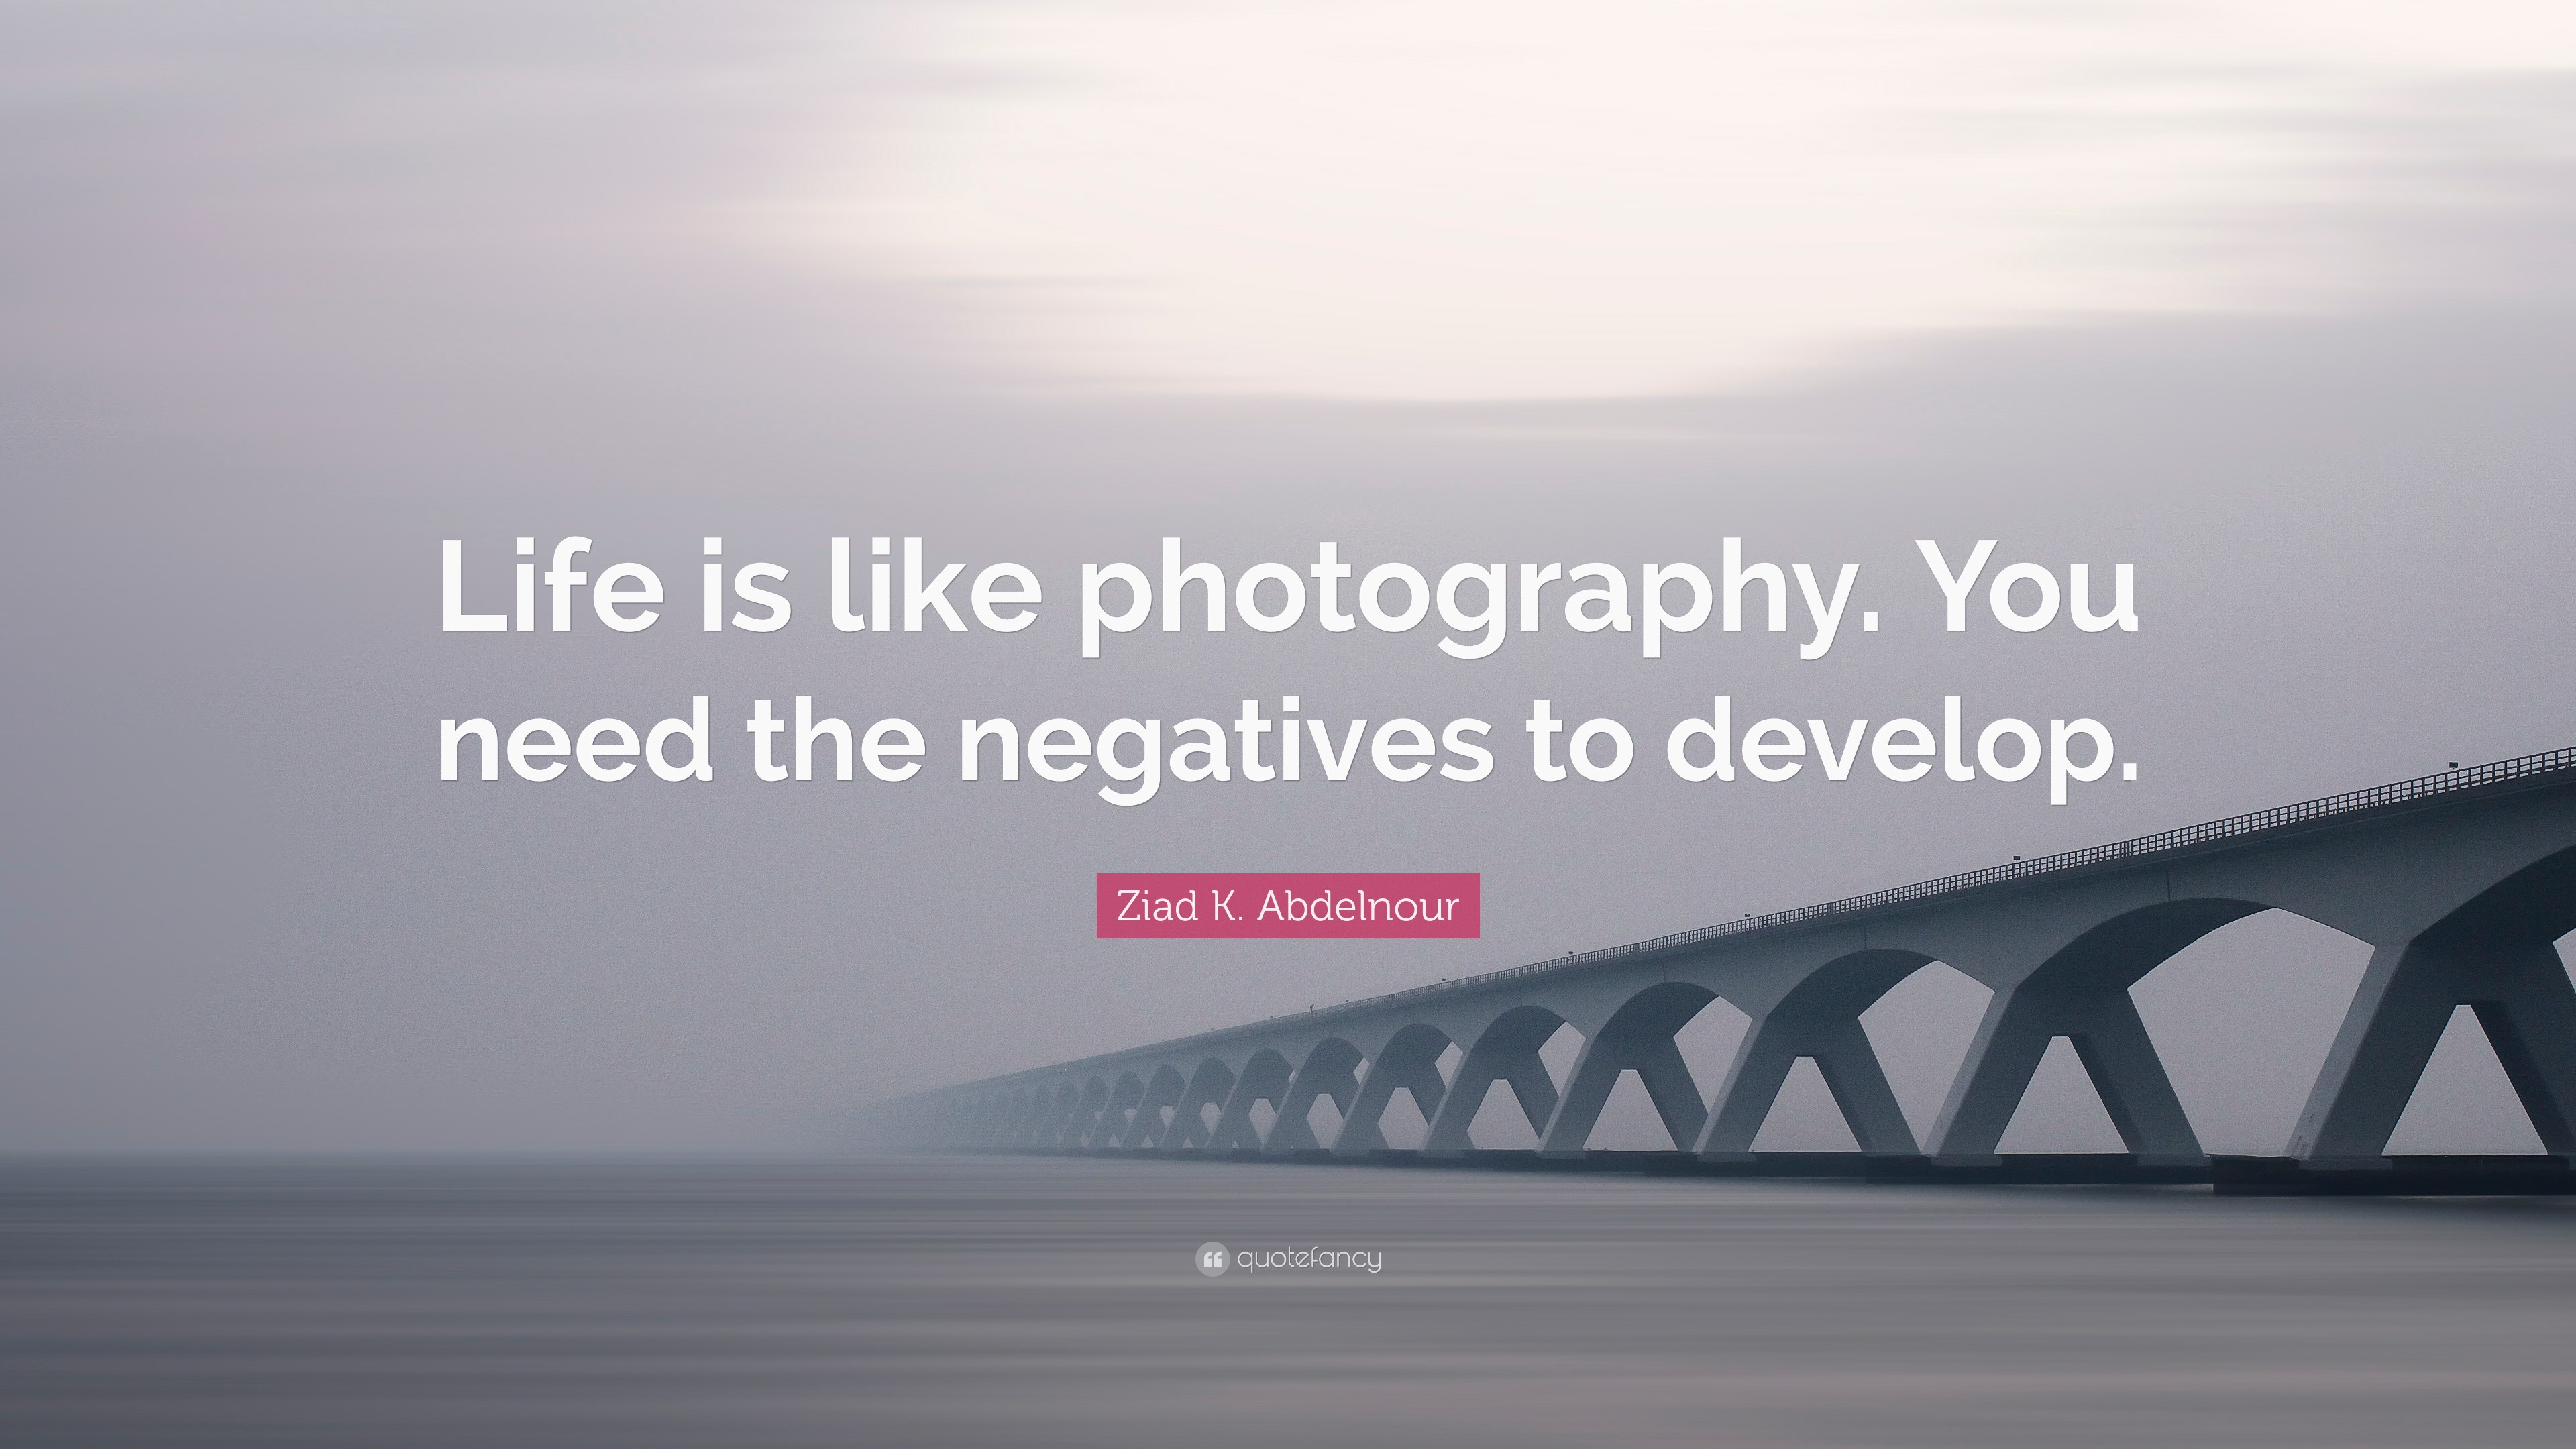 Ziad K Abdelnour Quote “Life is like photography You need the negatives